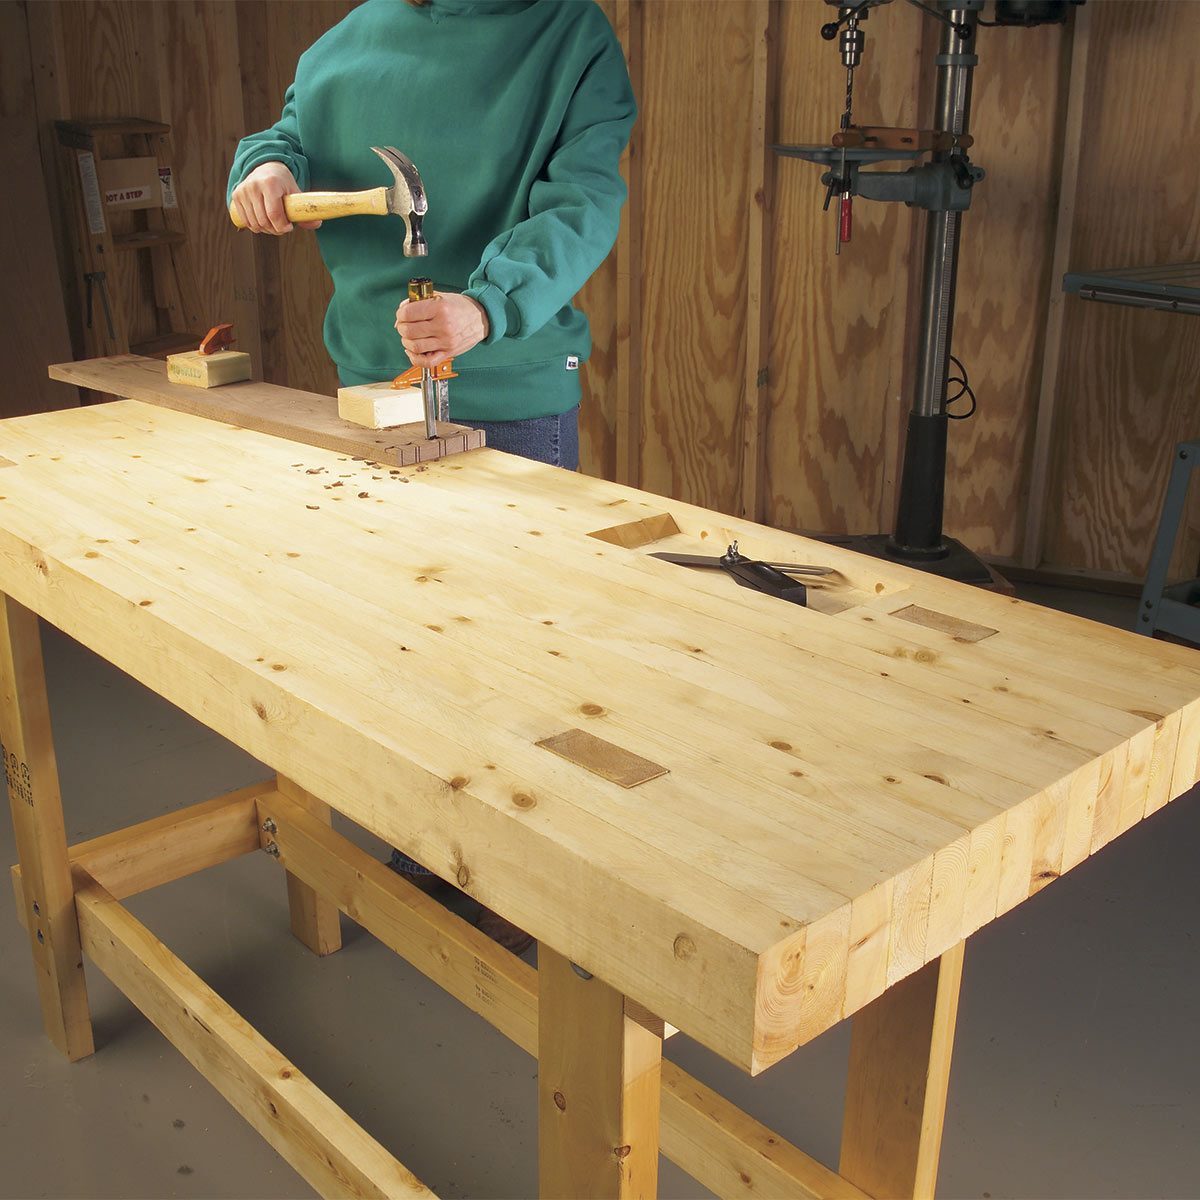 14 Super-Simple Workbenches You Can Build — The Family ...